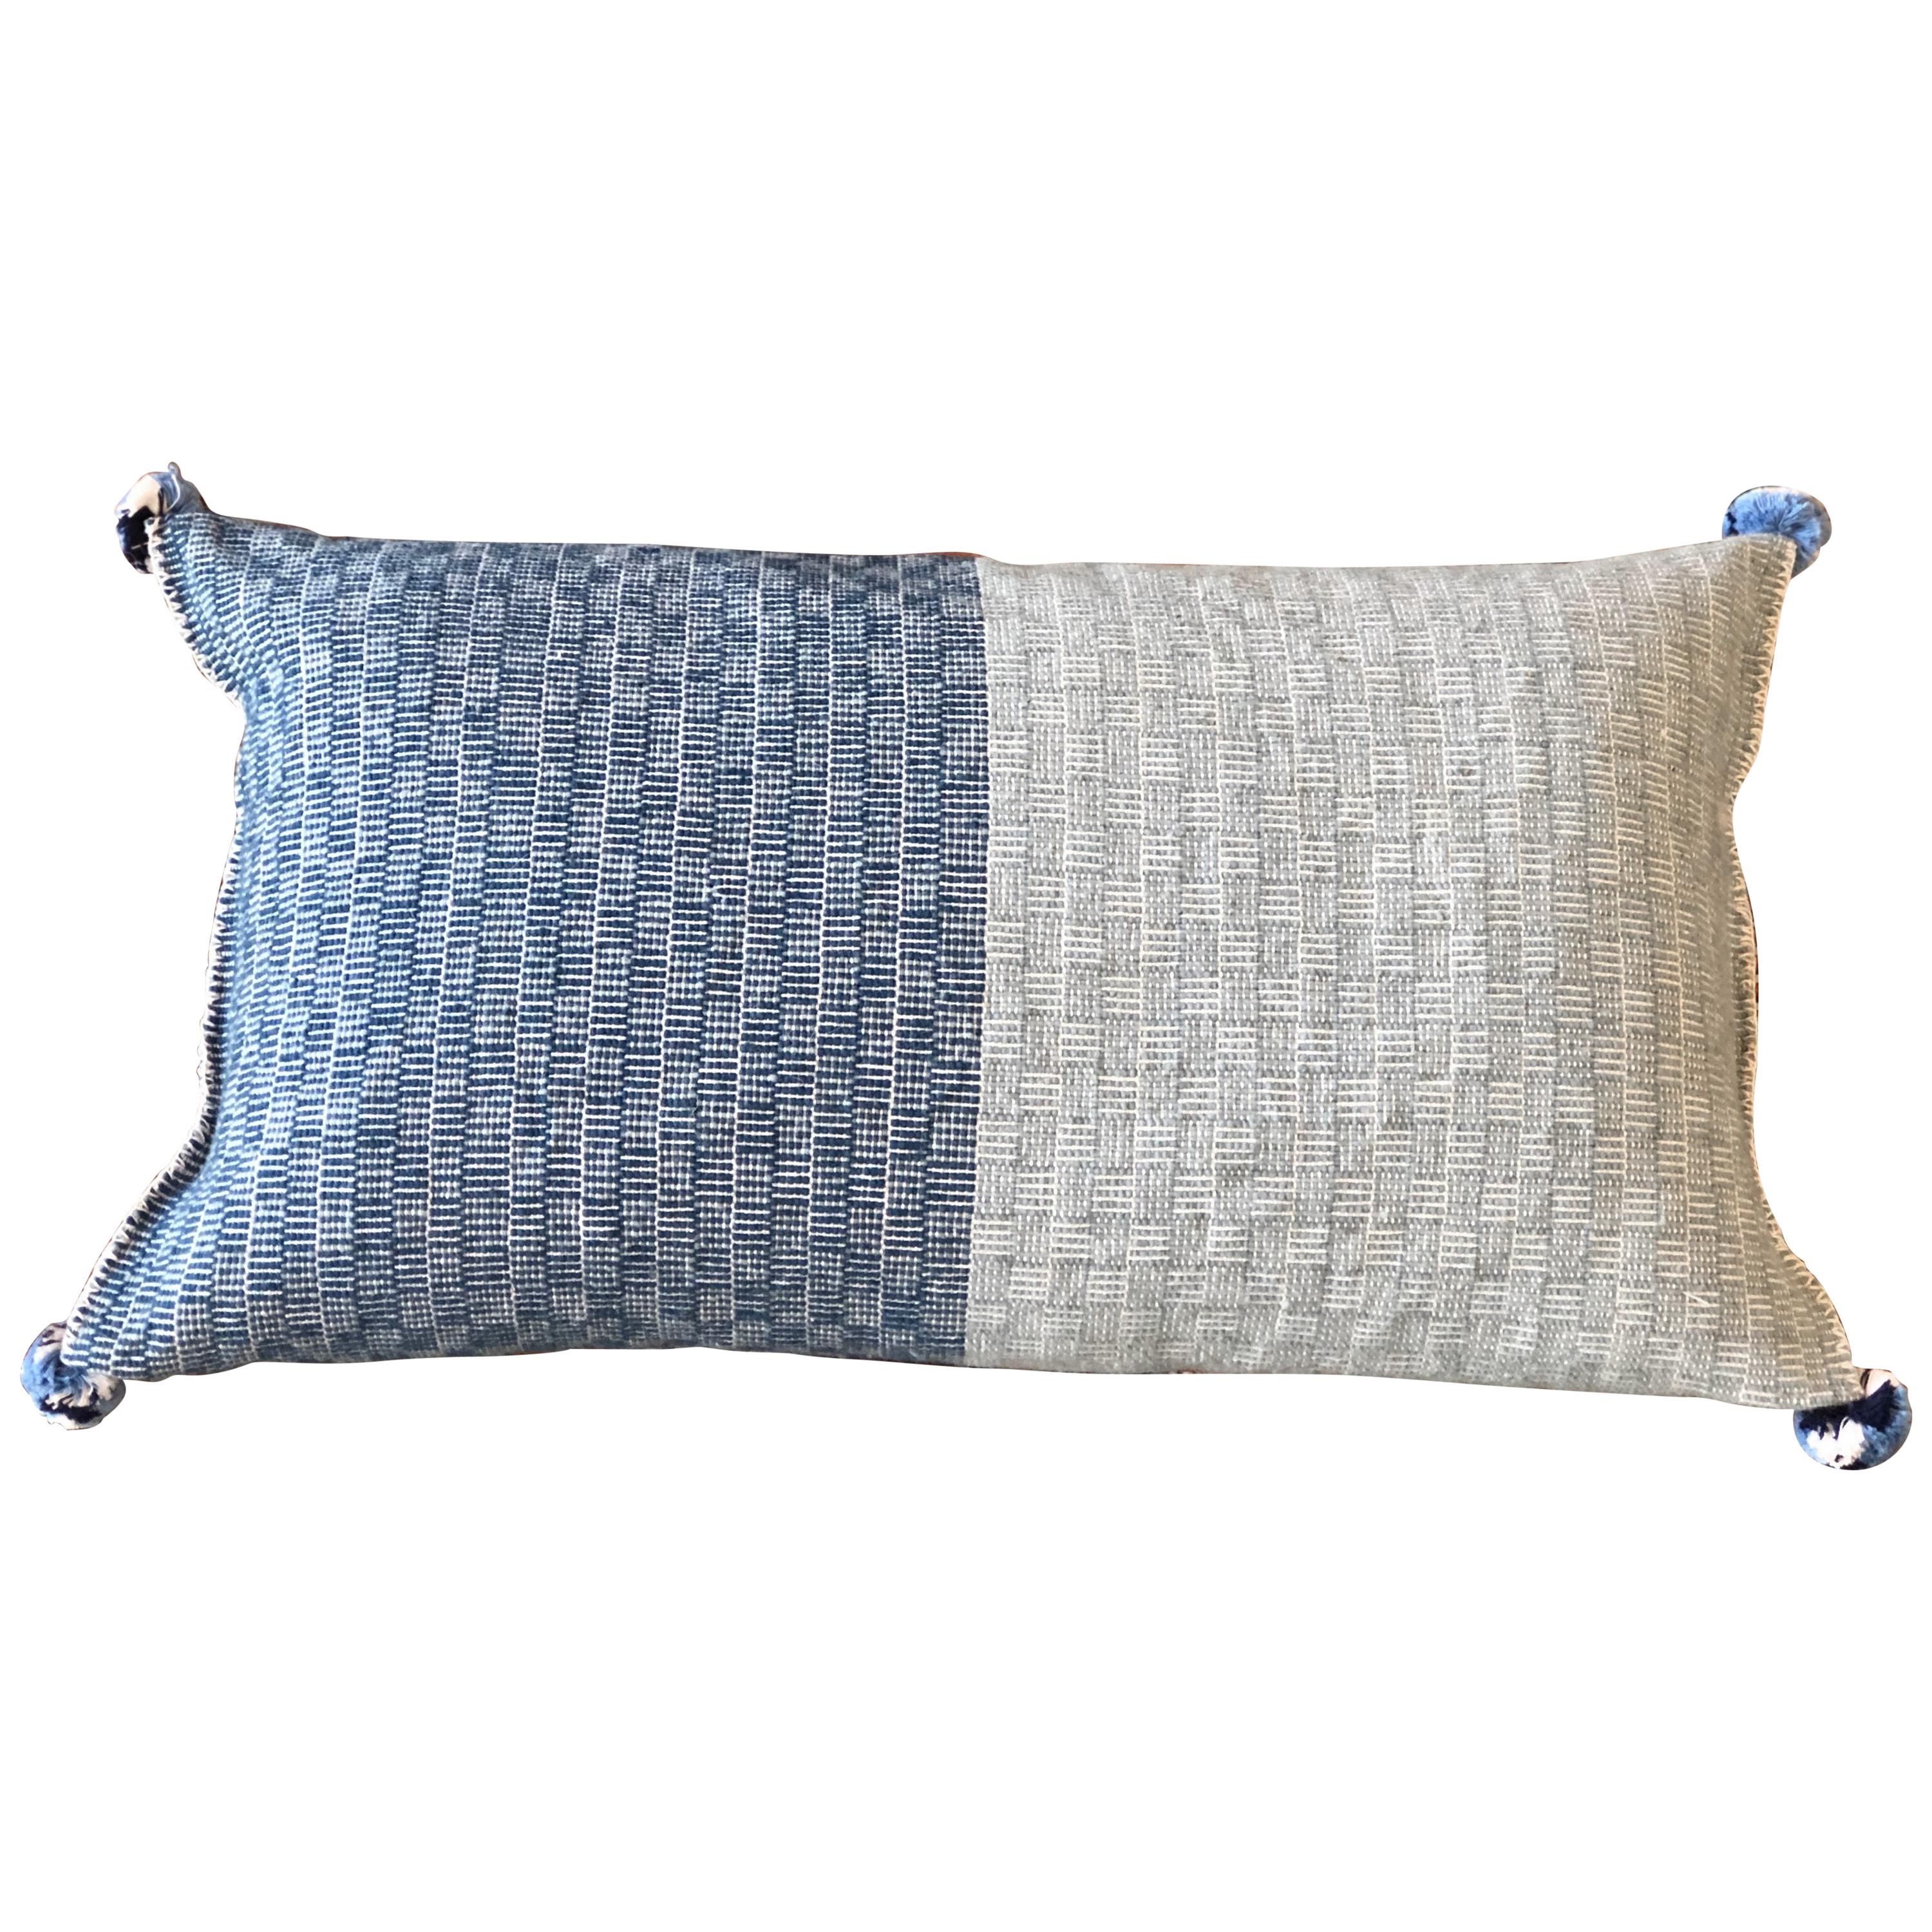 Handgewebte Wolle Throw Small Pillow Made with Natural Indigo:: auf Lager